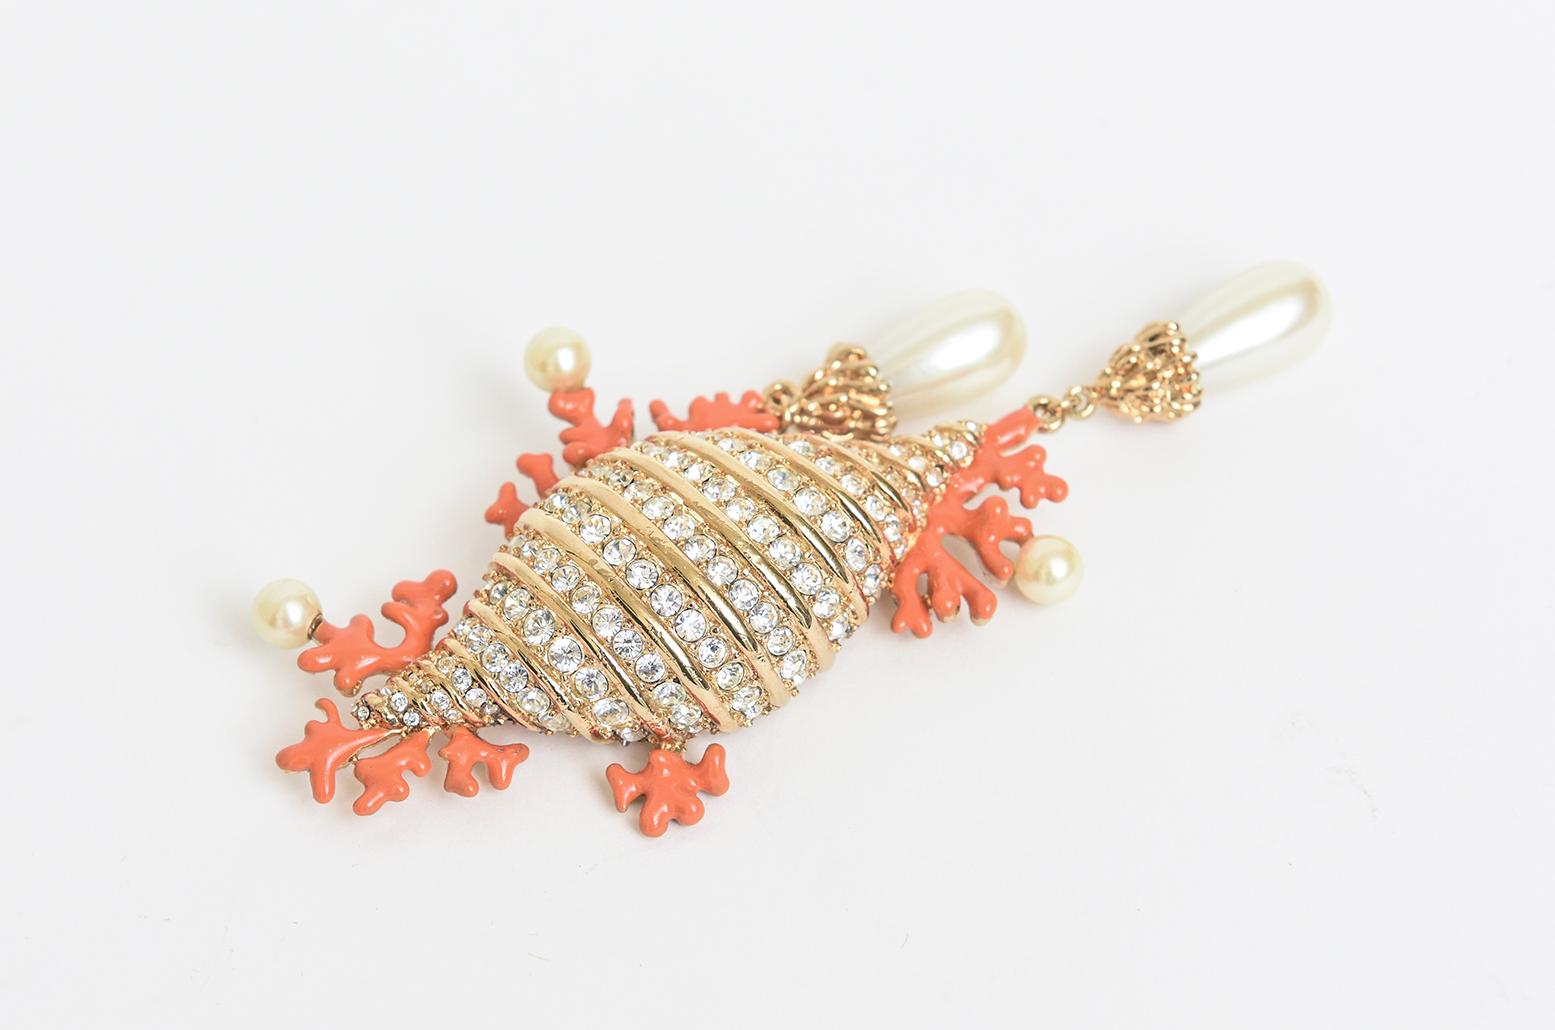 Bead Hutton Wilkinson Coral Enamel Faux Pearl, Rhinestone Gold Plated Brooch /Pin  For Sale